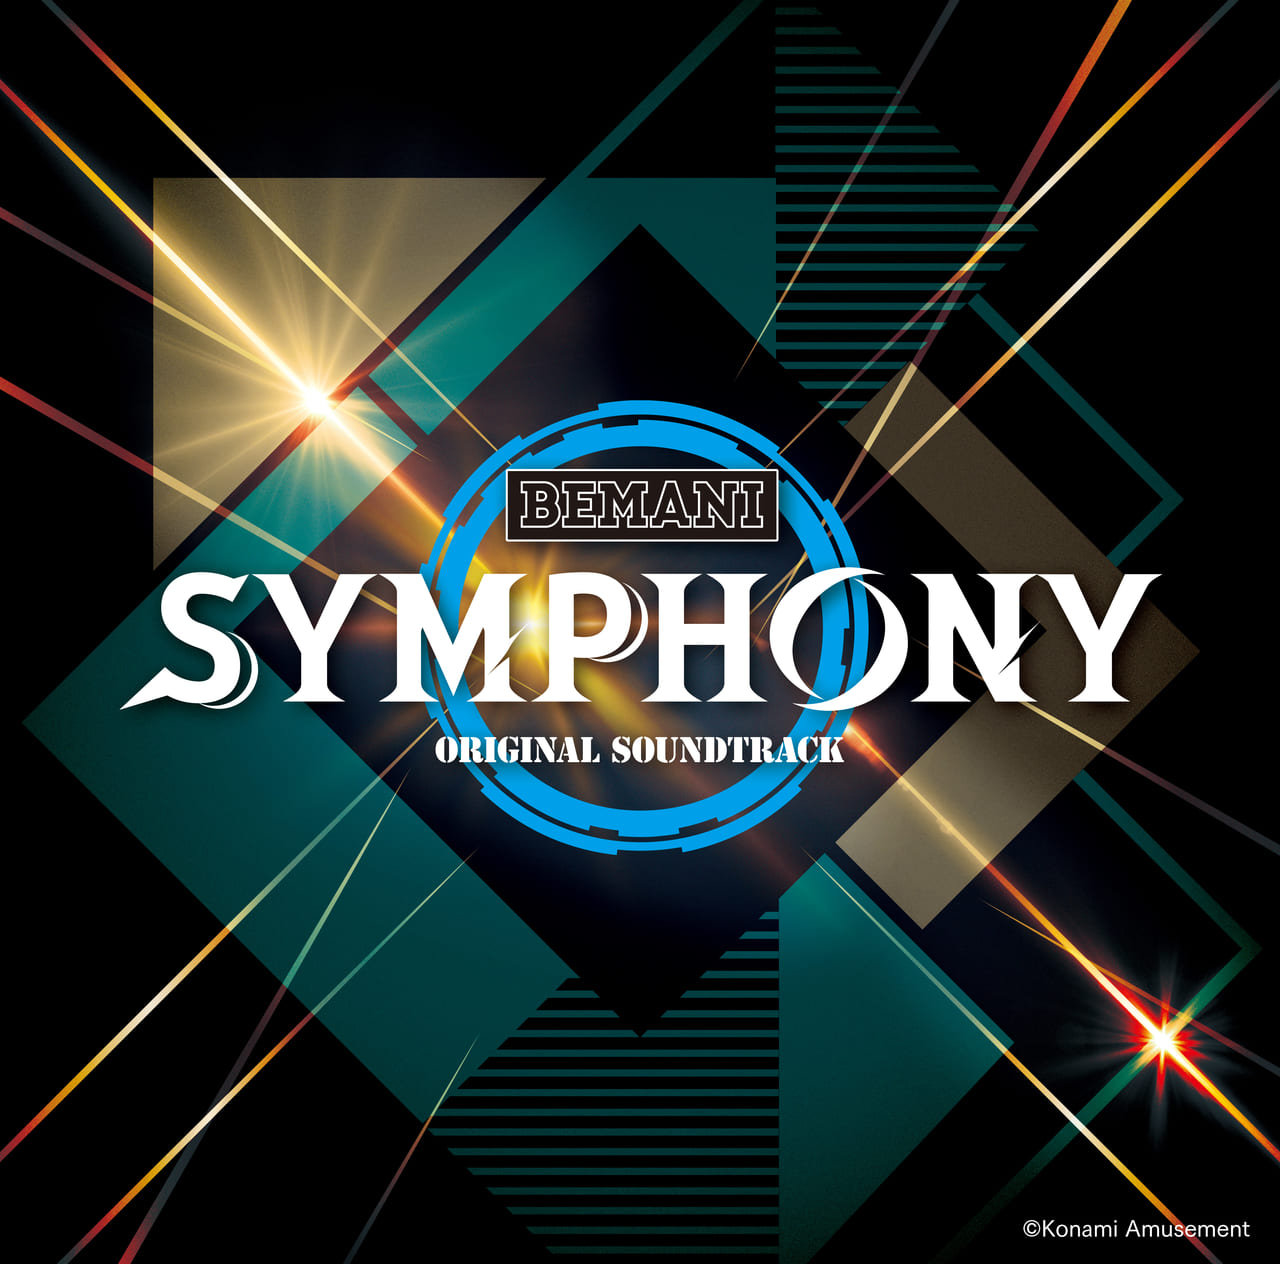 The 2nd phase of “BEMANI SYMPHONY” project is now revealed!